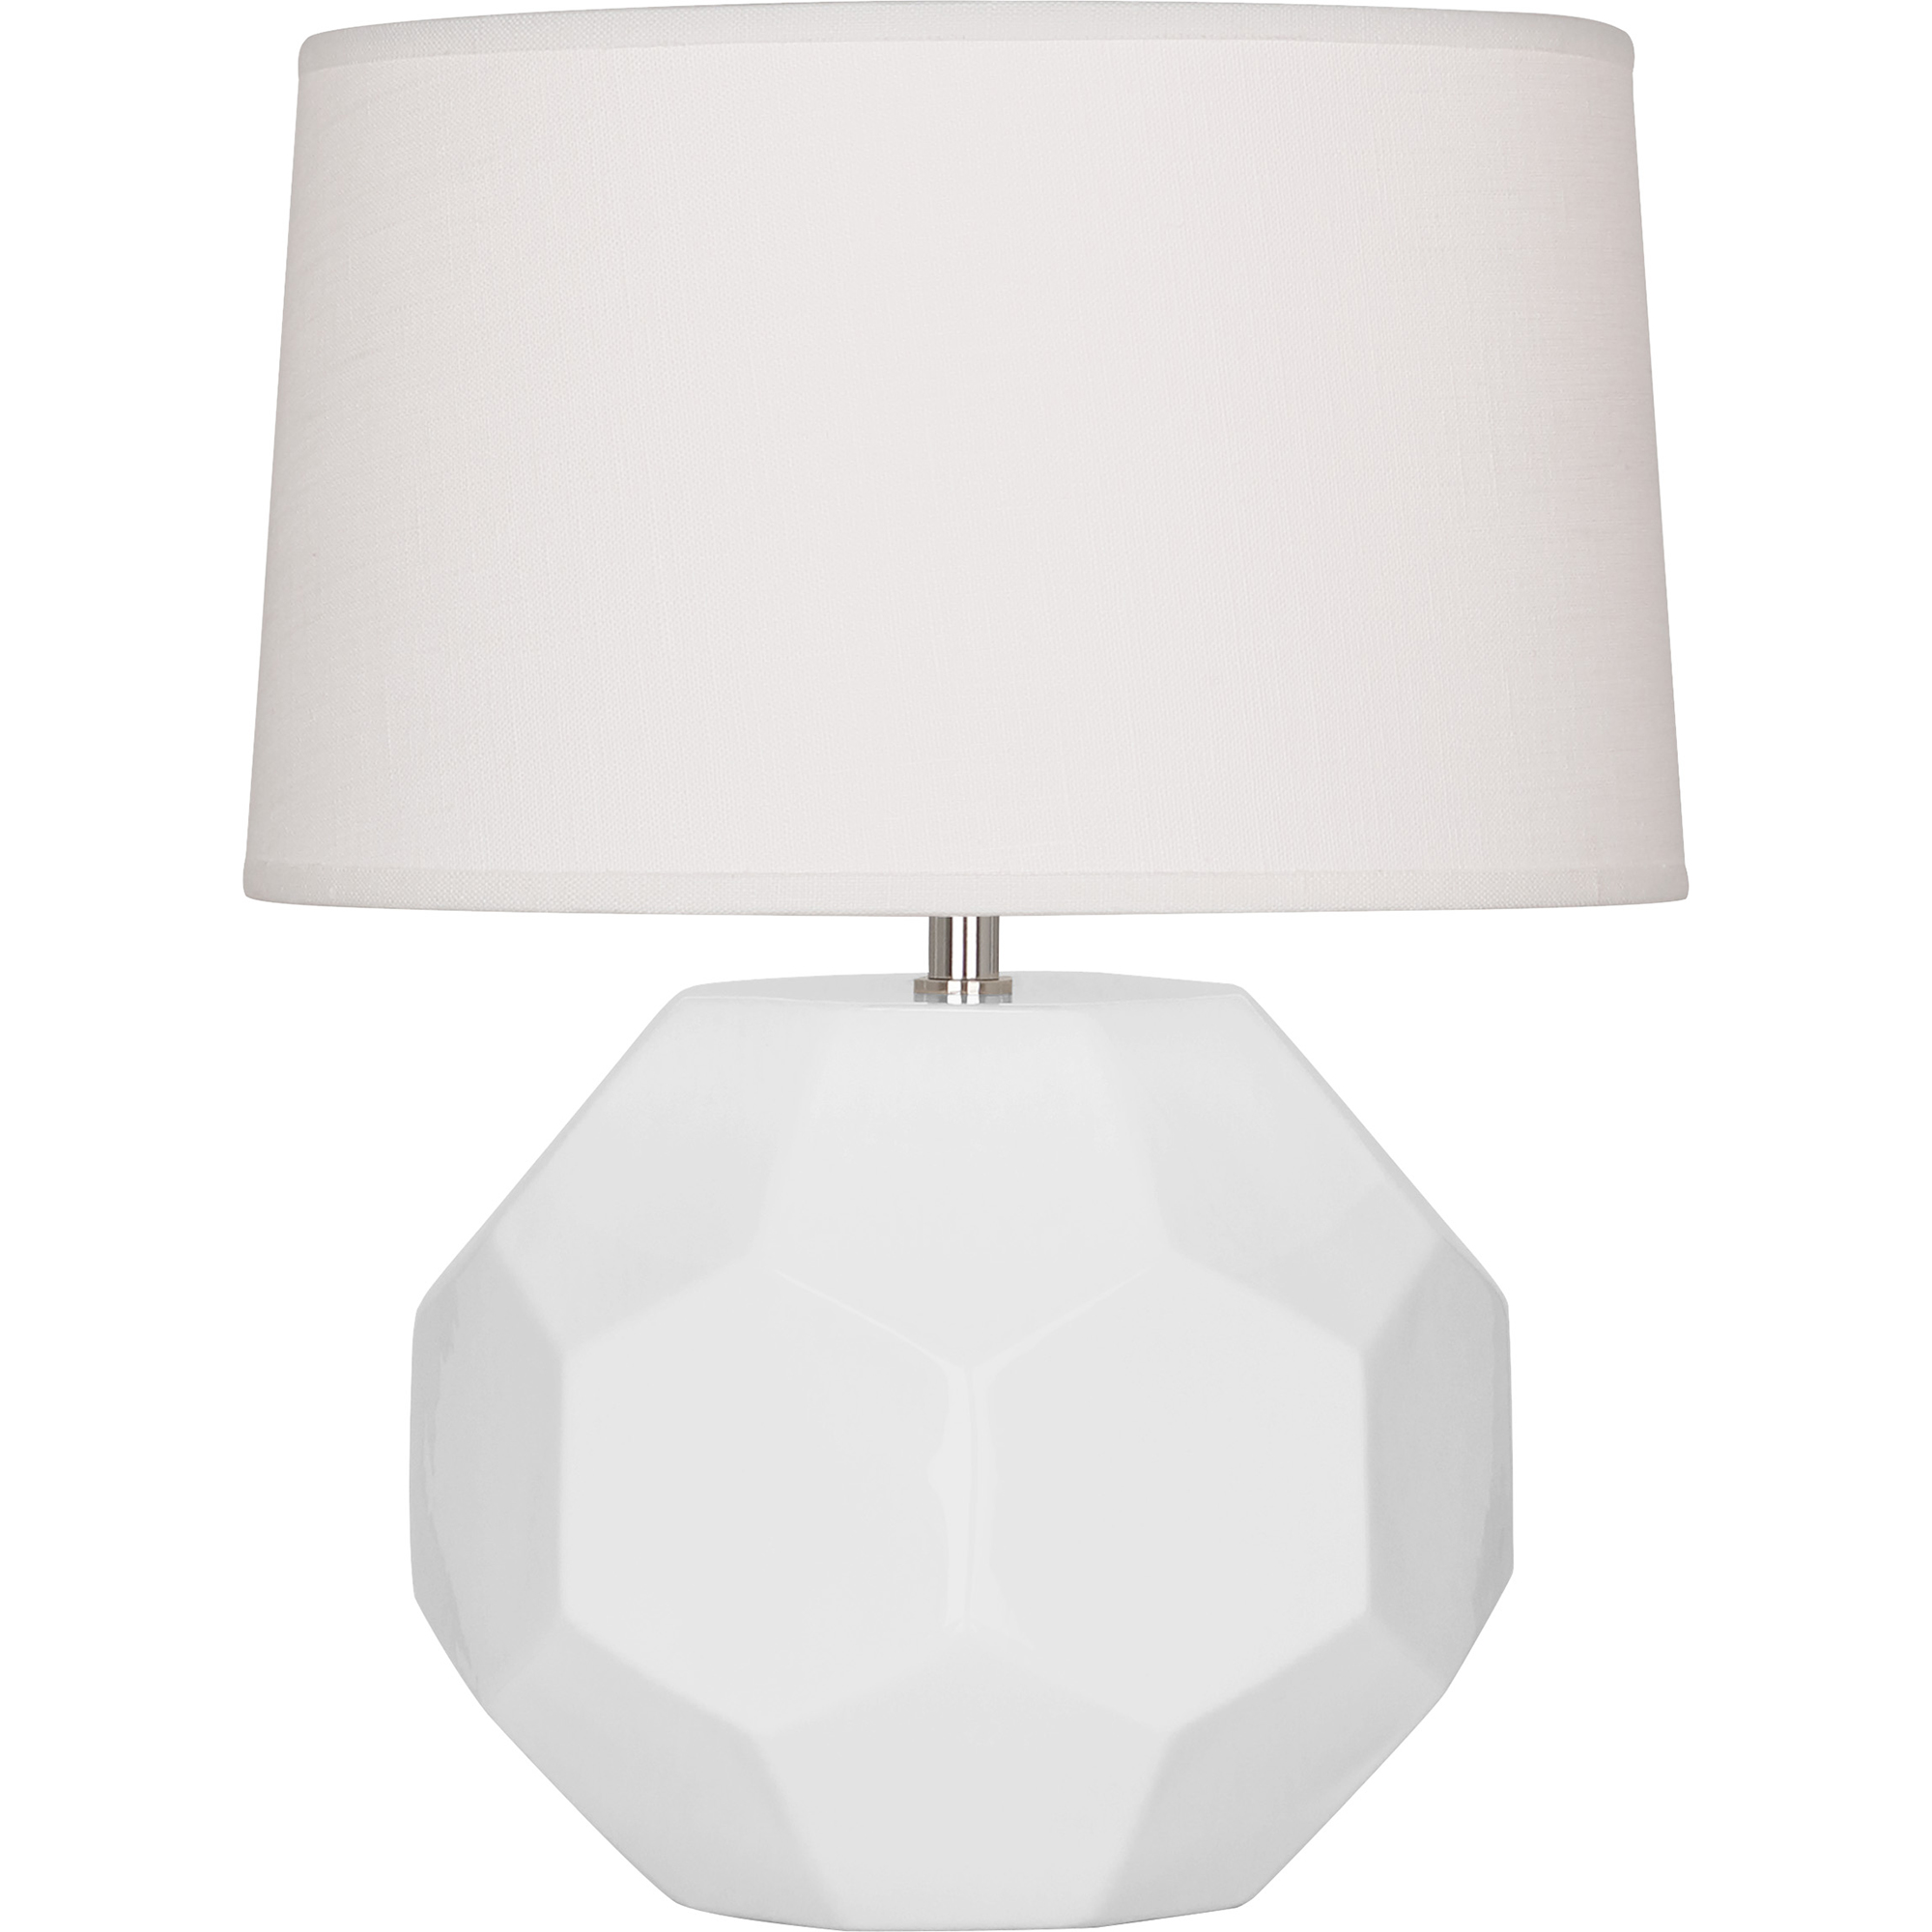 Franklin Accent Lamp Style #DY02